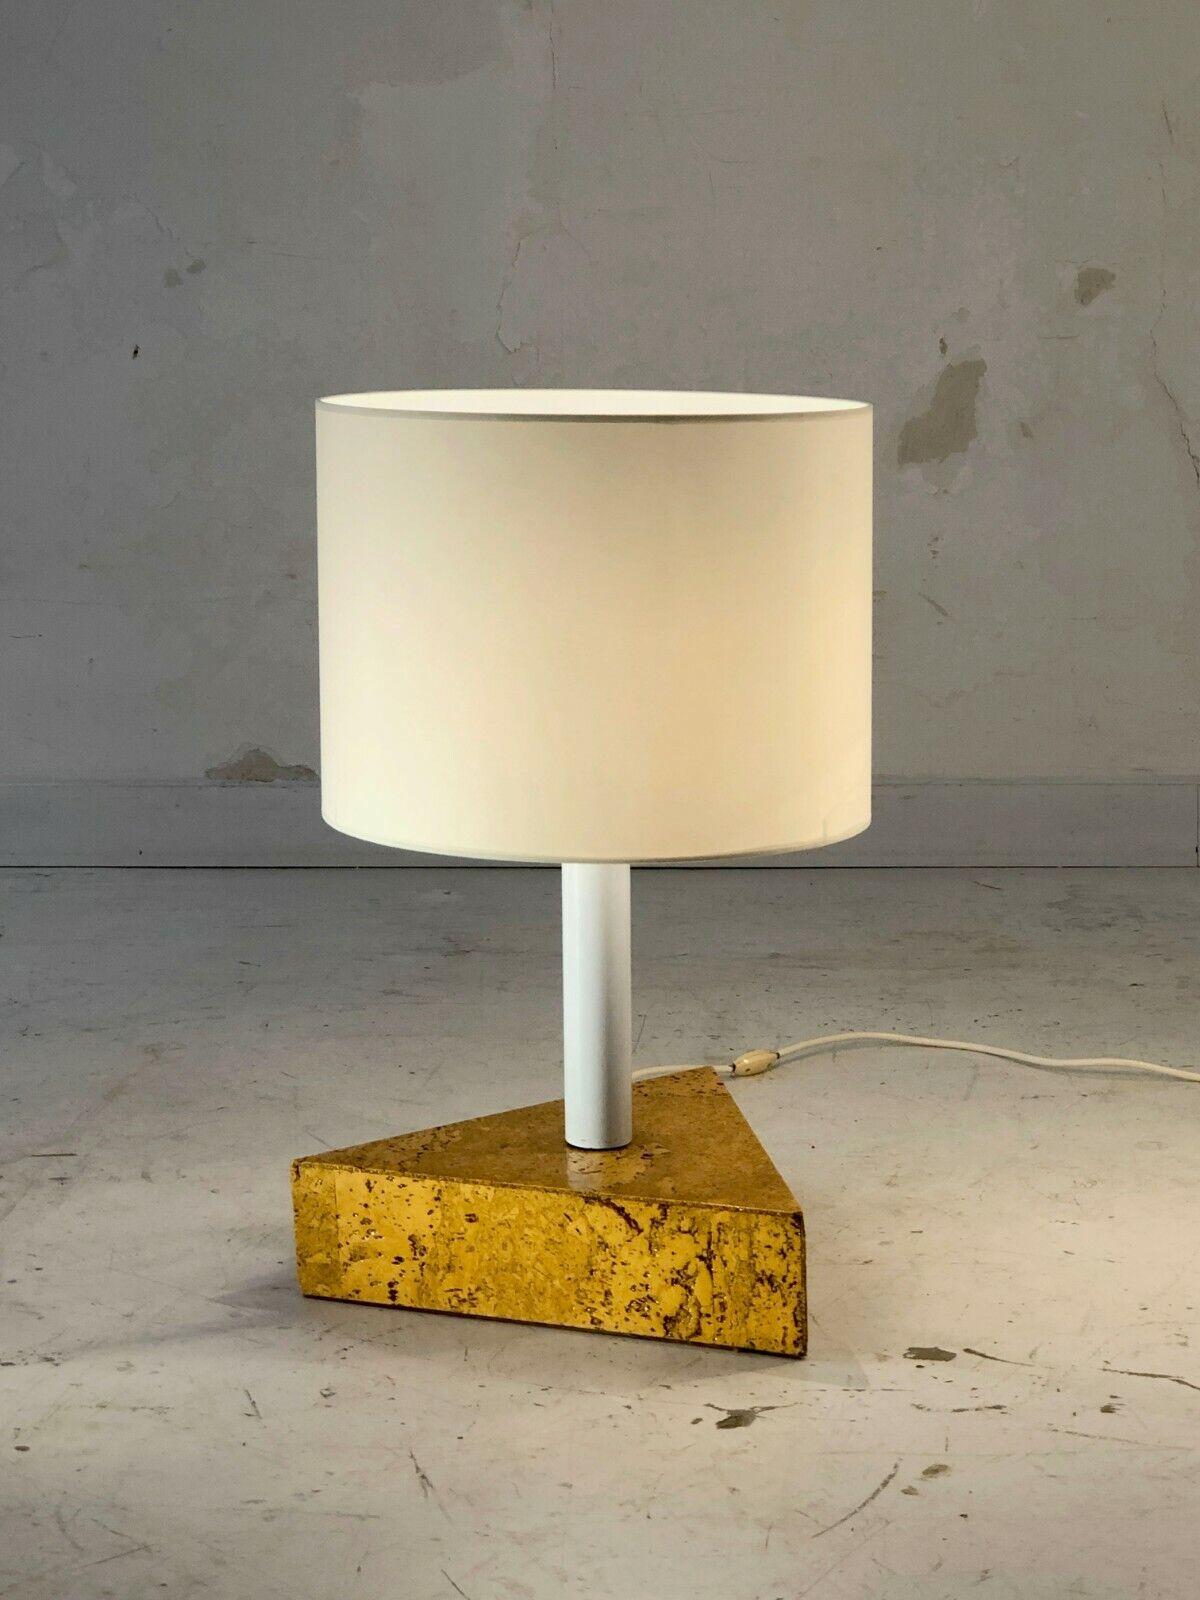 French An Important POST-MODERN MEMPHIS Floor or TABLE LAMP, France or Italy 1980 For Sale